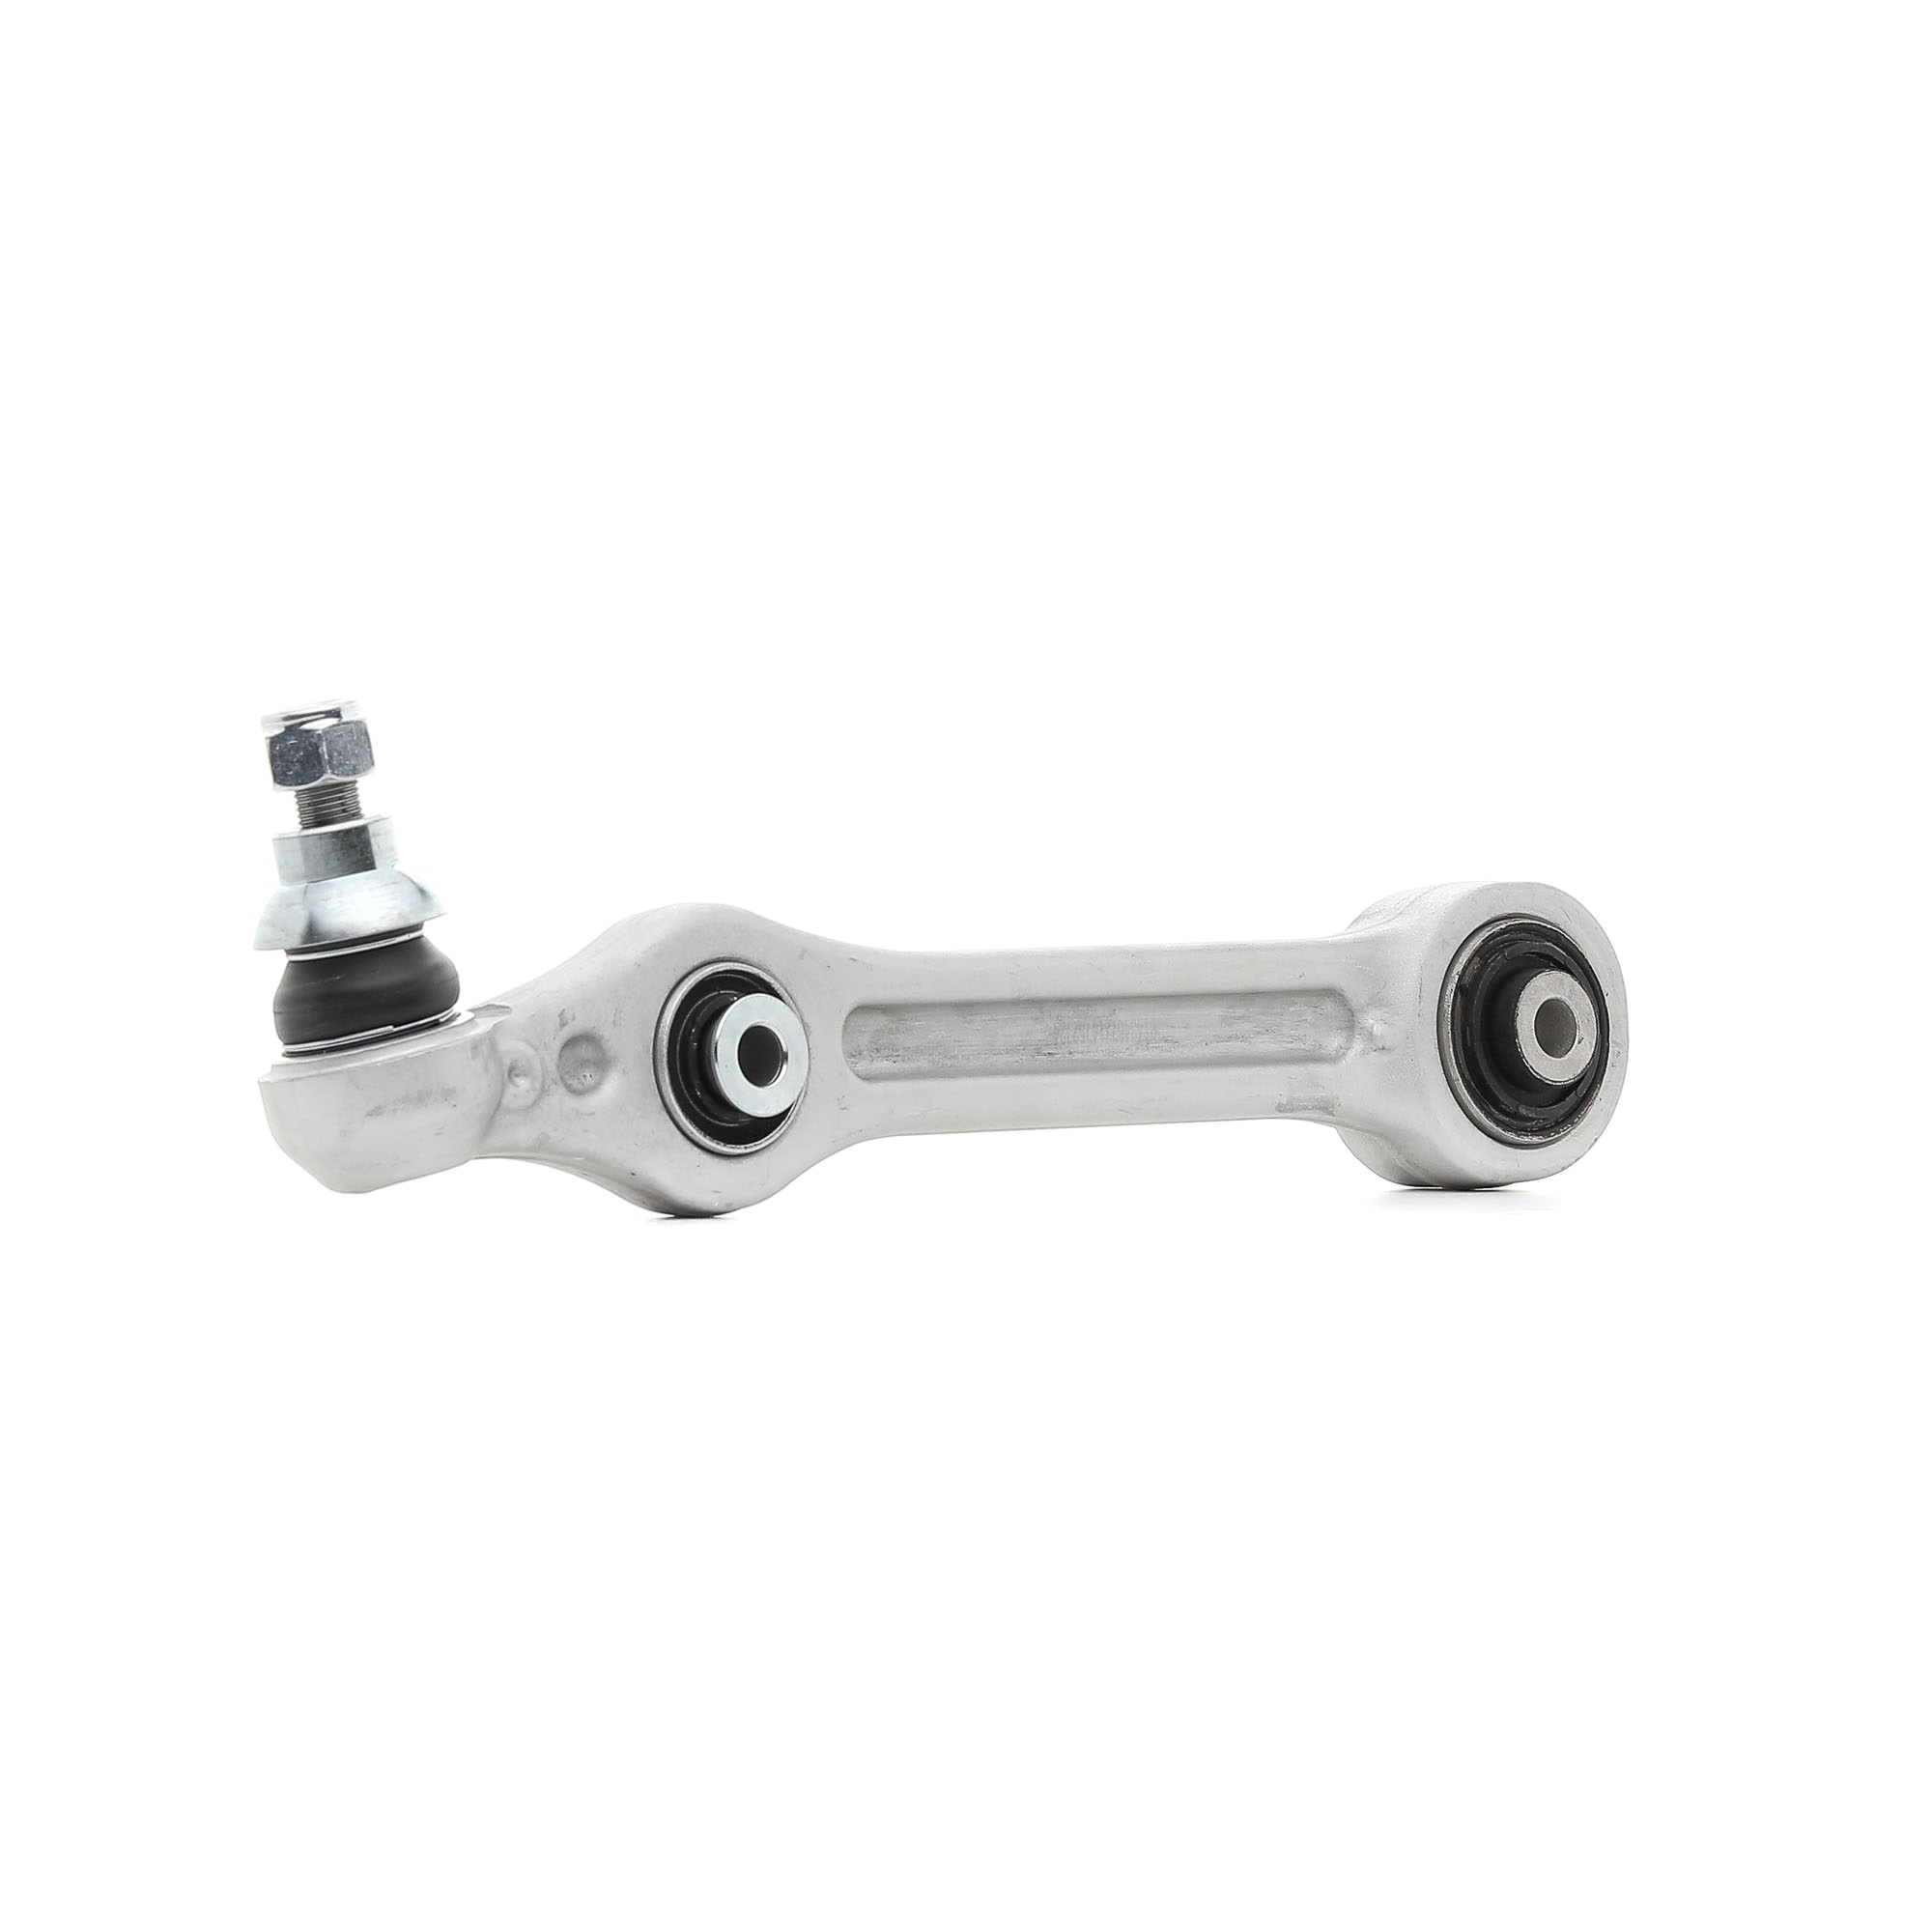 STARK SKCA-0051228 Suspension arm Front Axle, both sides, Lower, Rear, Control Arm, Aluminium, Cone Size: 16 mm